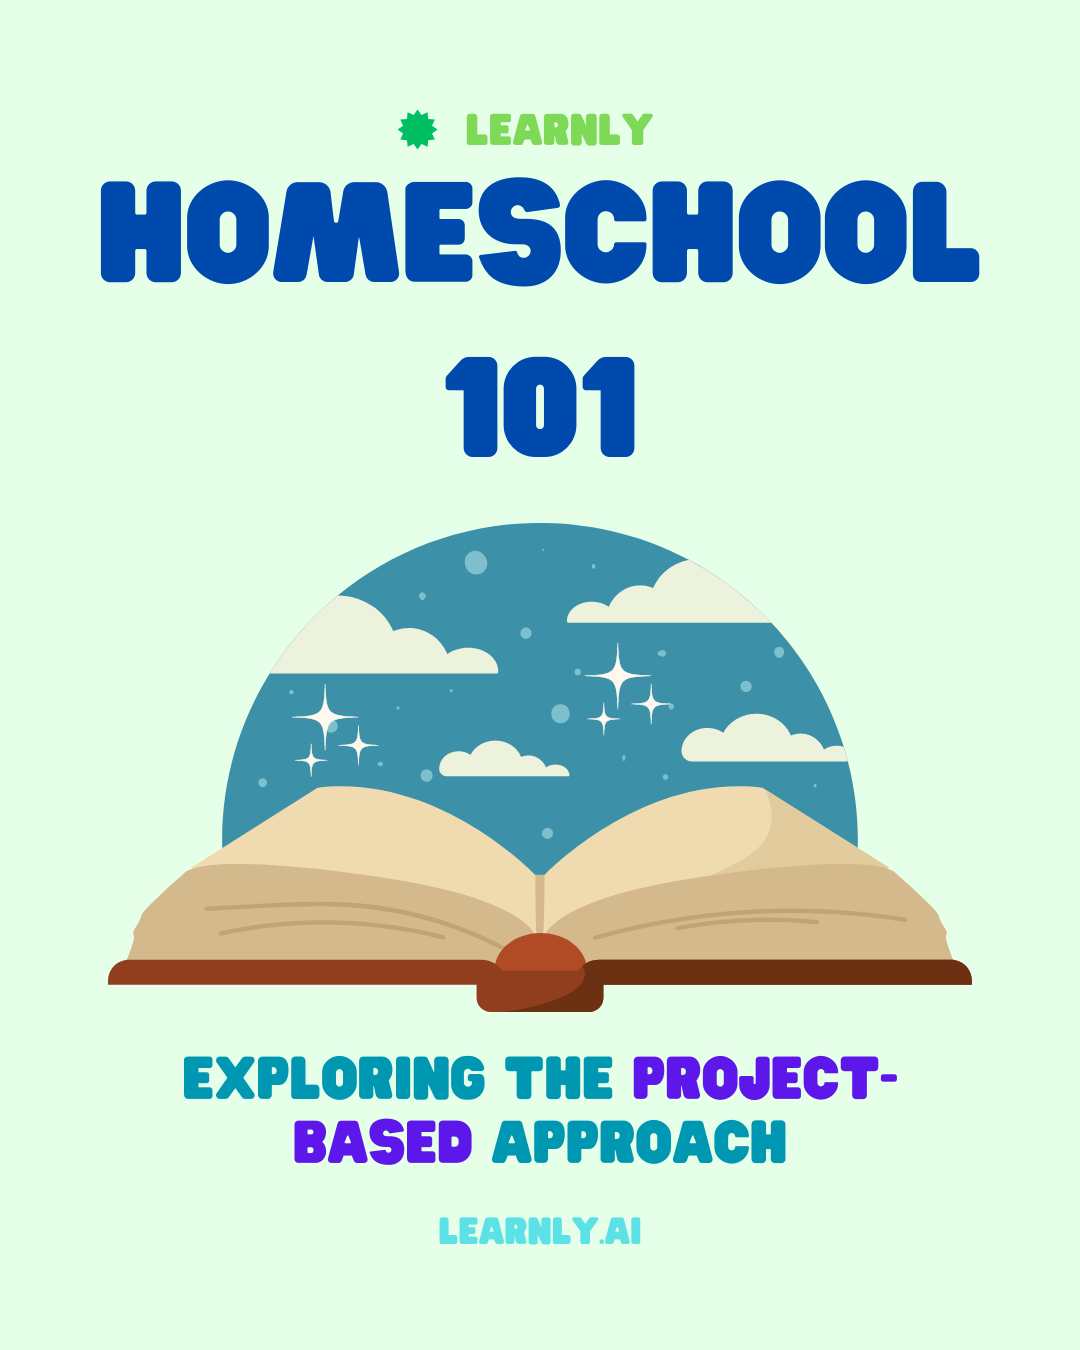 Homeschooling Approaches 101: Exploring the Project-Based Approach to Homeschooling